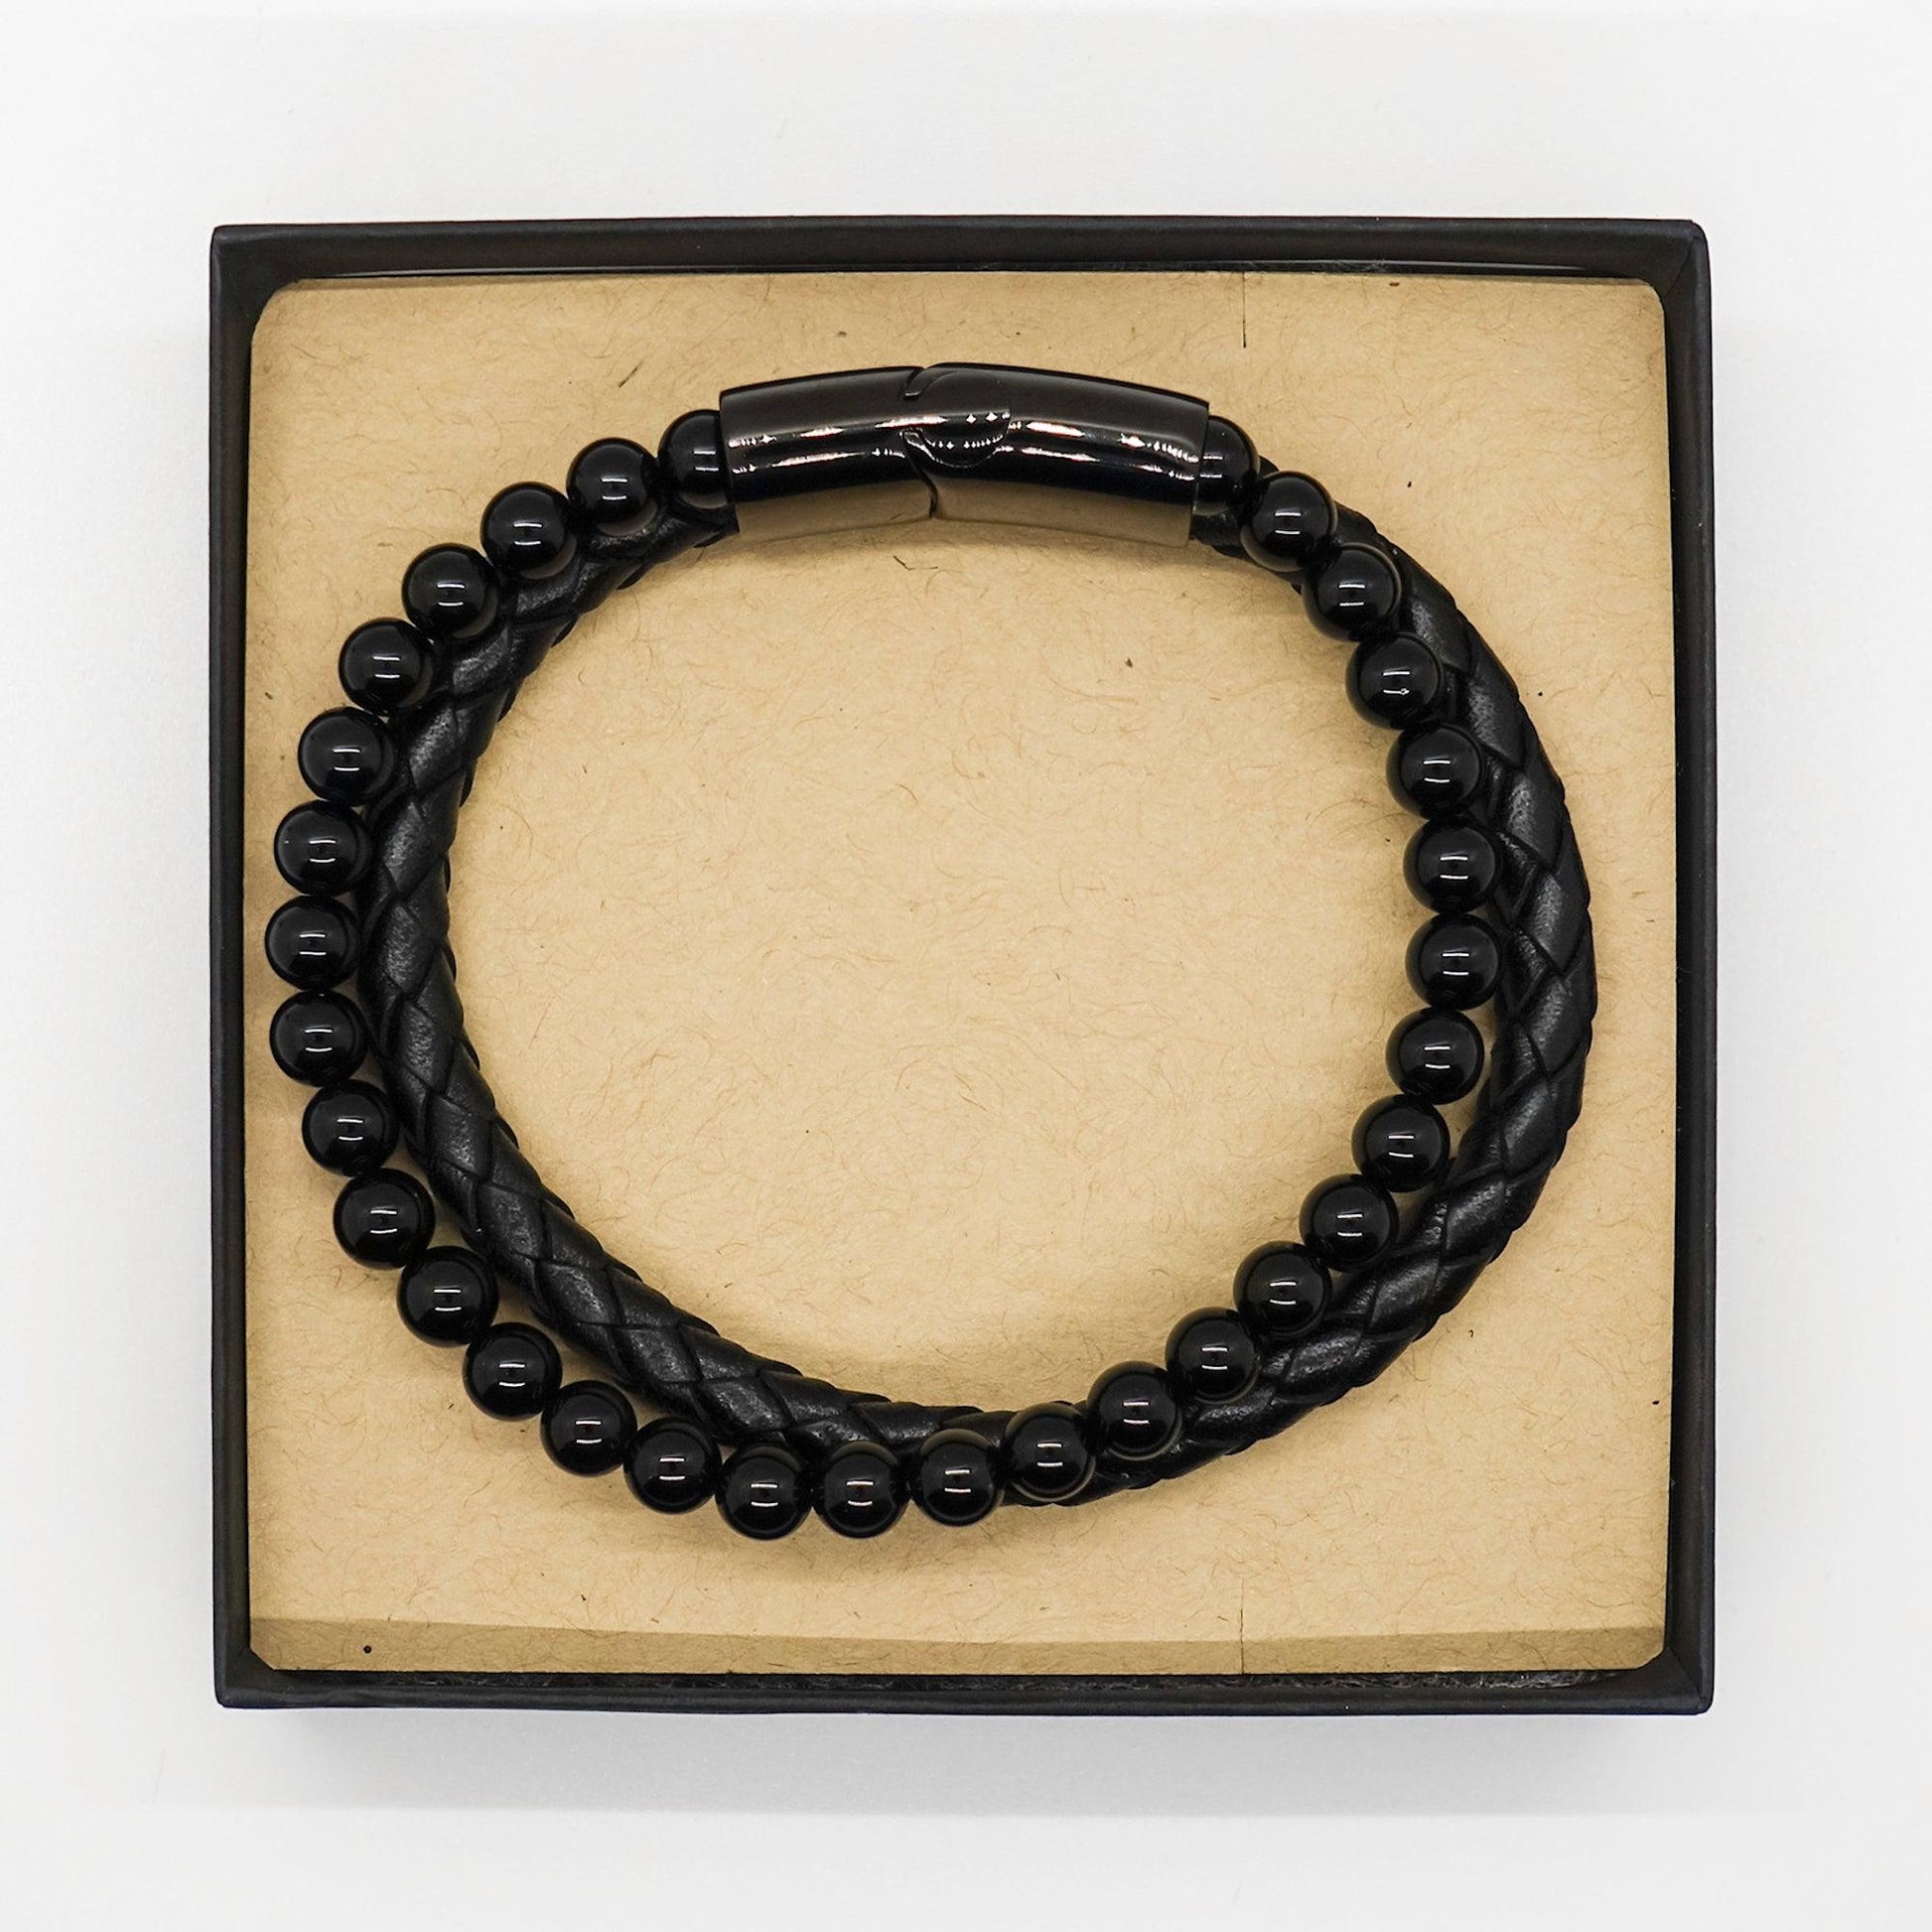 Dealer Black Braided Leather Stone Bracelet - Thanks for being who you are - Birthday Christmas Jewelry Gifts Coworkers Colleague Boss - Mallard Moon Gift Shop